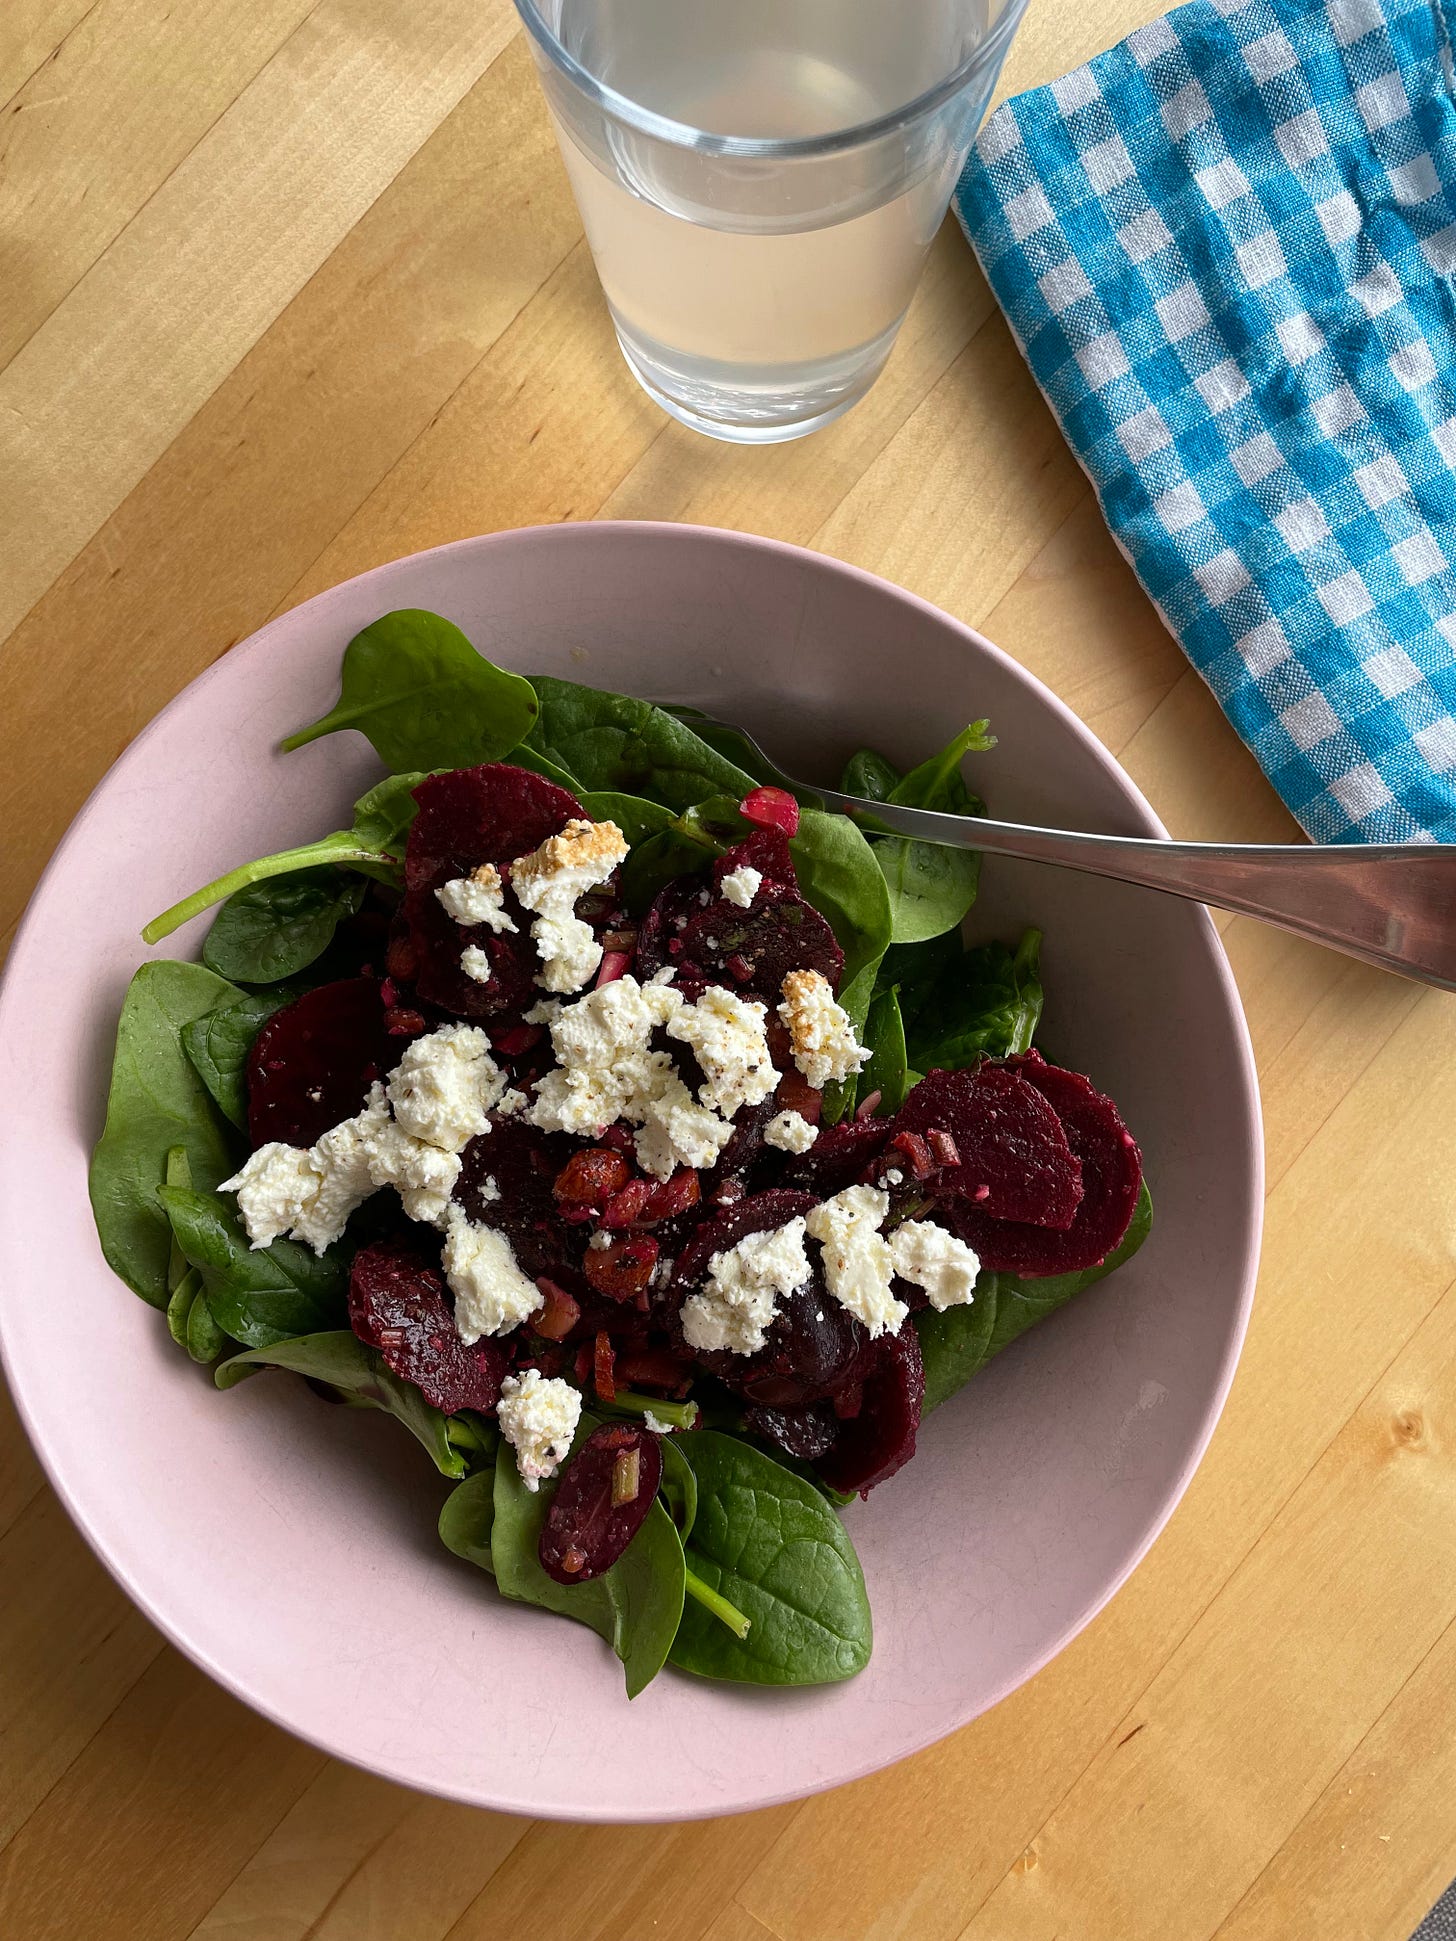 Pink bowl filled with baby spinach leaves, chopped cooked beetroot, feta cheese, parsley vinegarette and roasted almonds. A glass of coconut water and chequered napkin nearby.